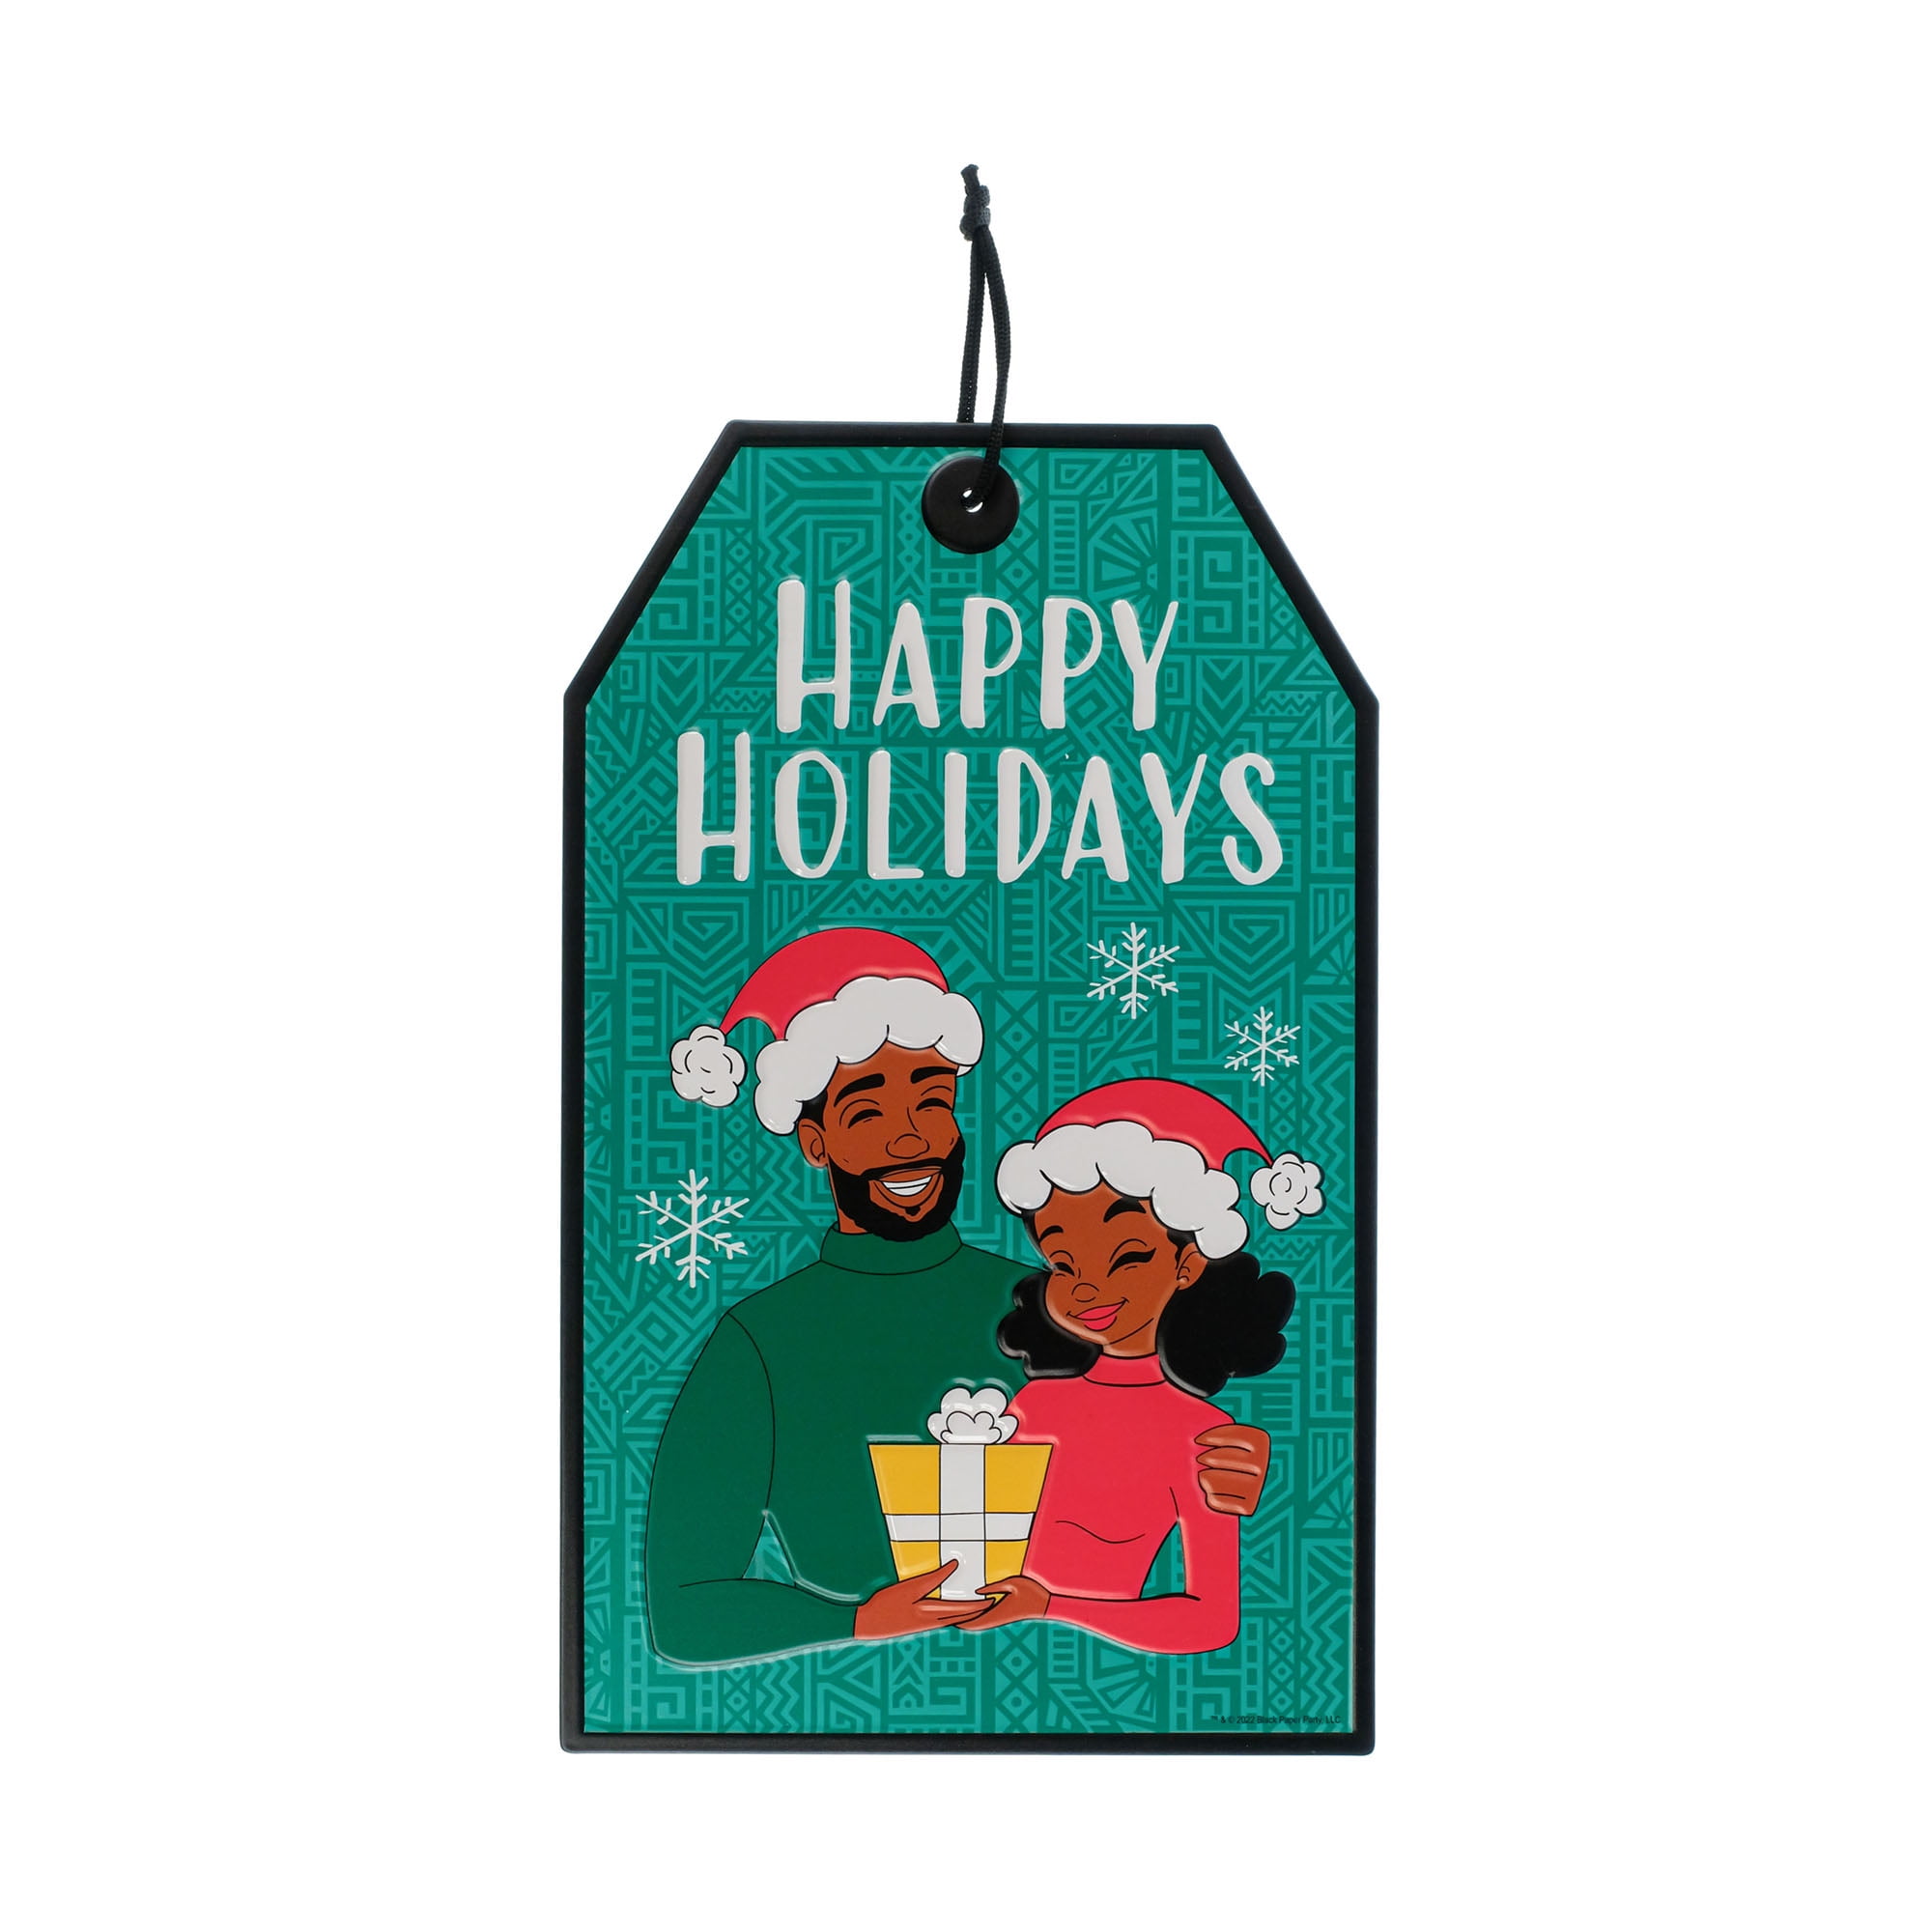 Black Paper Party, Noel and Stacy, " Happy Holidays", Metal Hanging Sign, 13.75 inches Tall, Metal, Multi-Color, Green